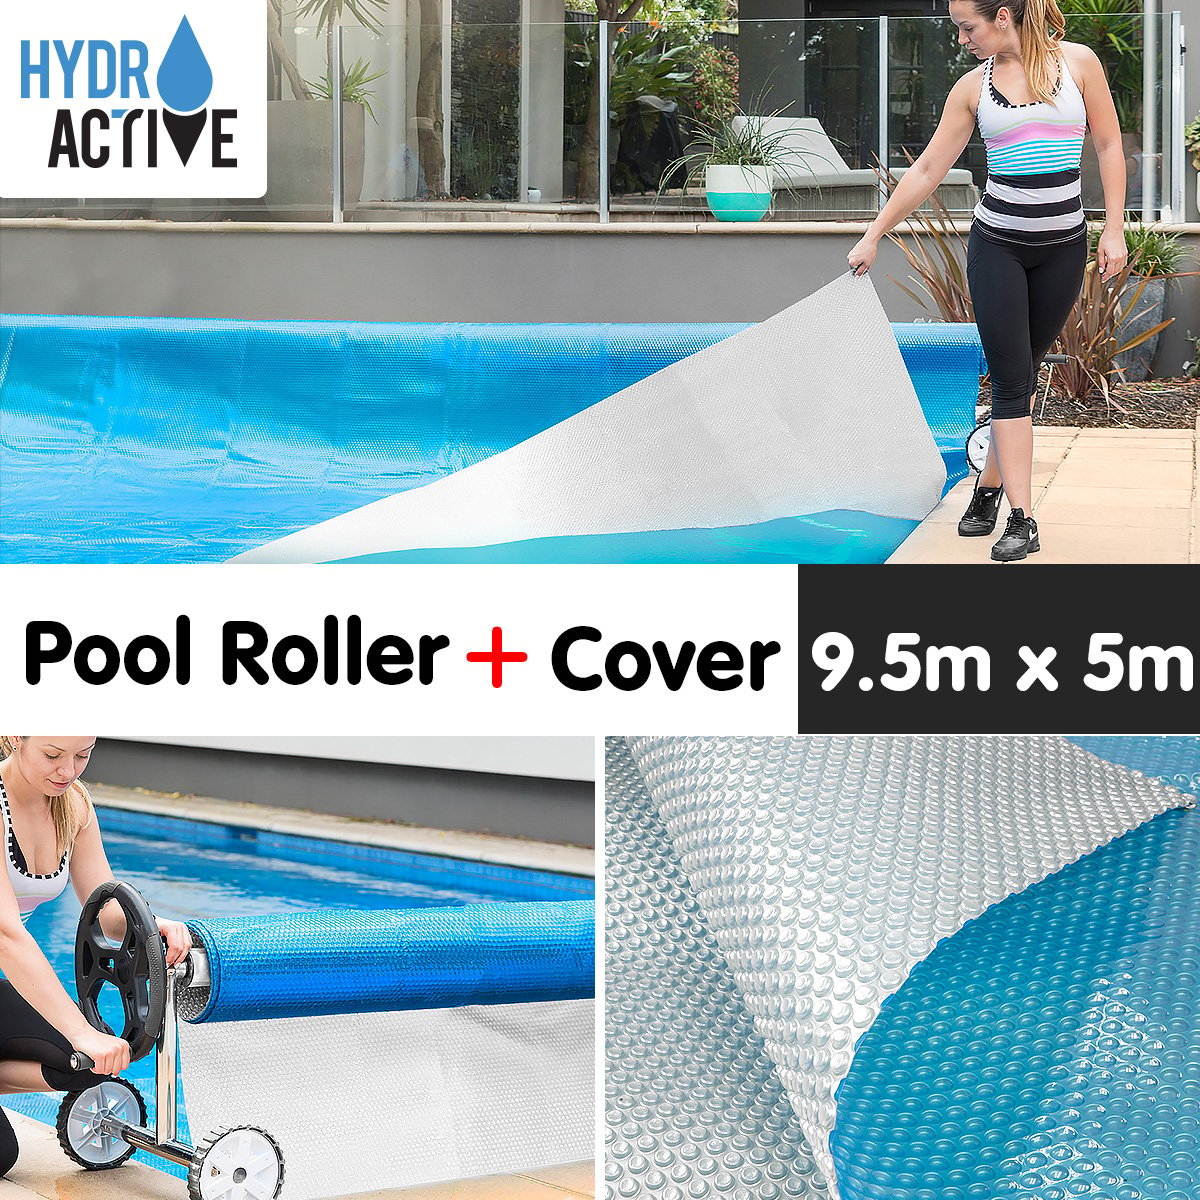 400micron Swimming Pool Roller Cover Combo - Silver/Blue - 9.5m x 5m 2